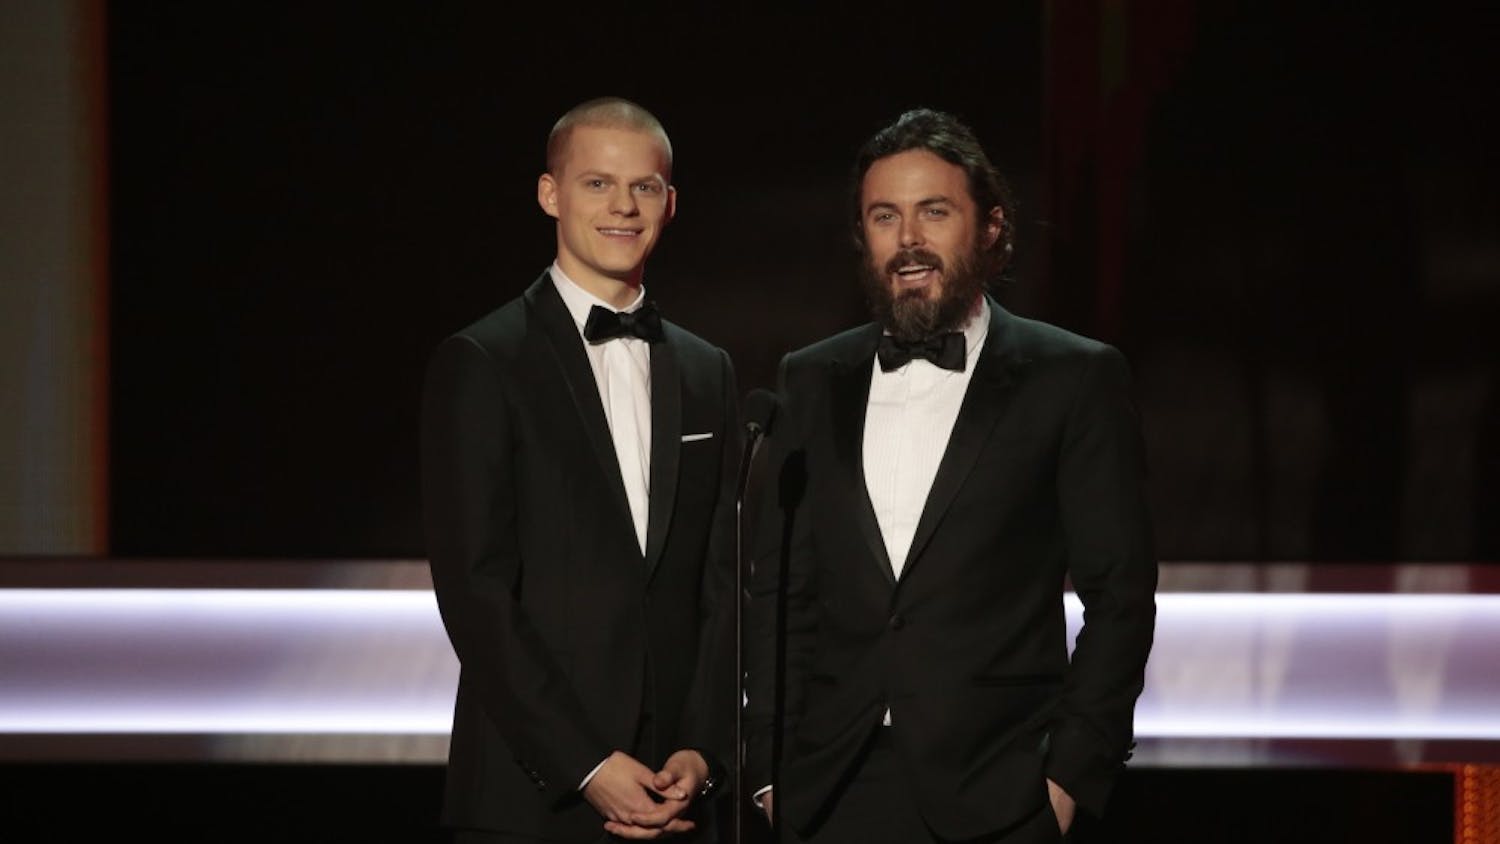 Lucas Hedges and Casey Affleck during the 23rd Annual Screen Actors Guild Awards at the Shrine Auditorium in Los Angeles on Sunday, Jan. 29, 2017. (Robert Gauthier/Los Angeles Times/TNS)